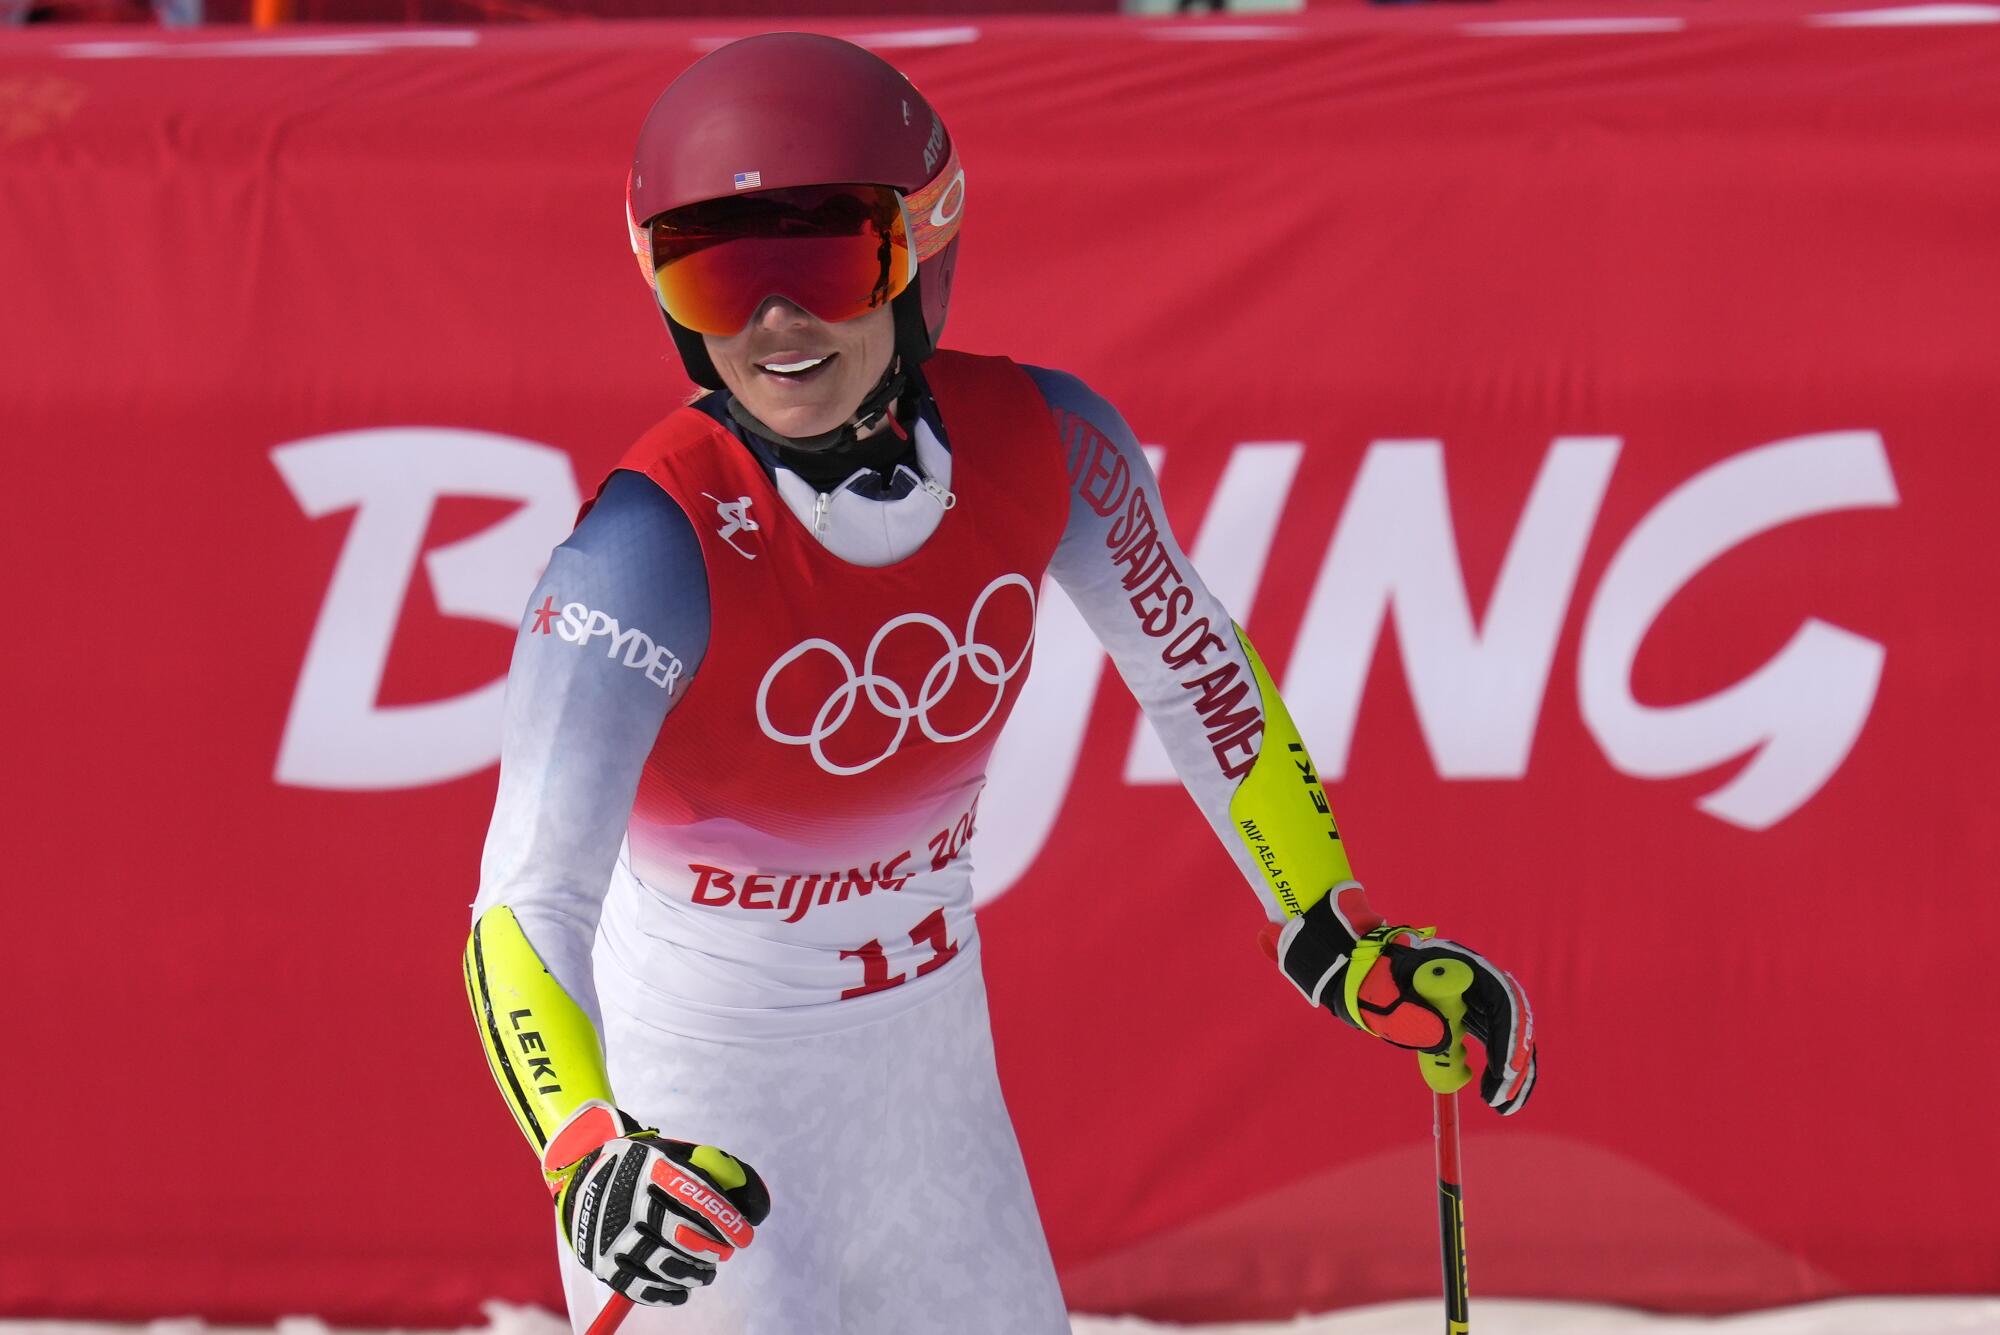 Mikaela Shiffrin reacts after finishing the women's super-G at the 2022 Olympics.